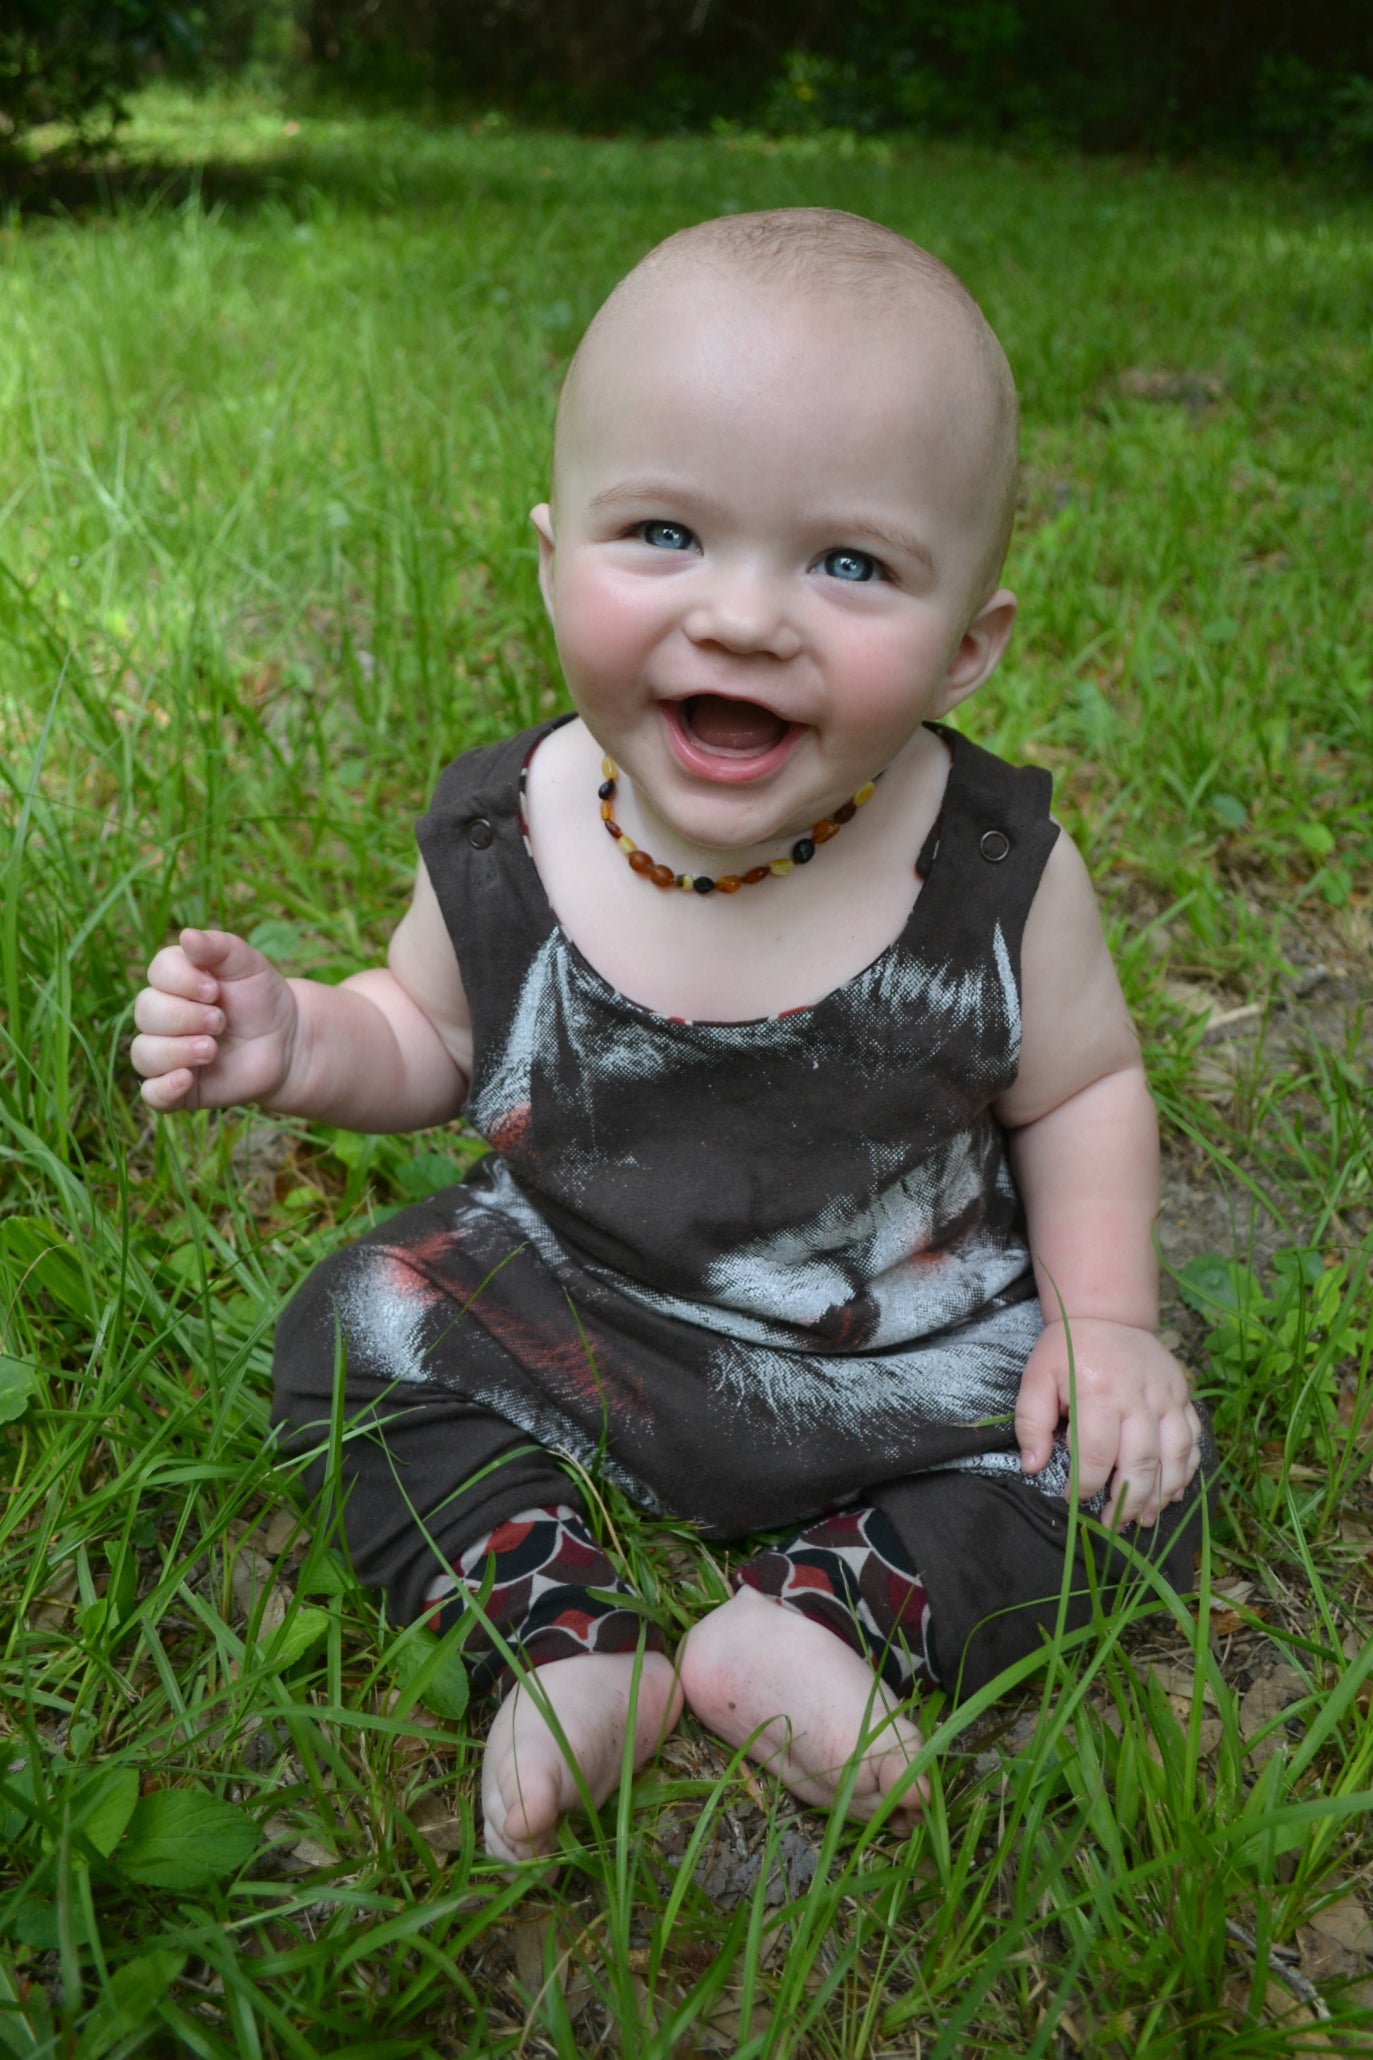 Custom Upcycled Overall Harem Romper (Pants or Shorts)